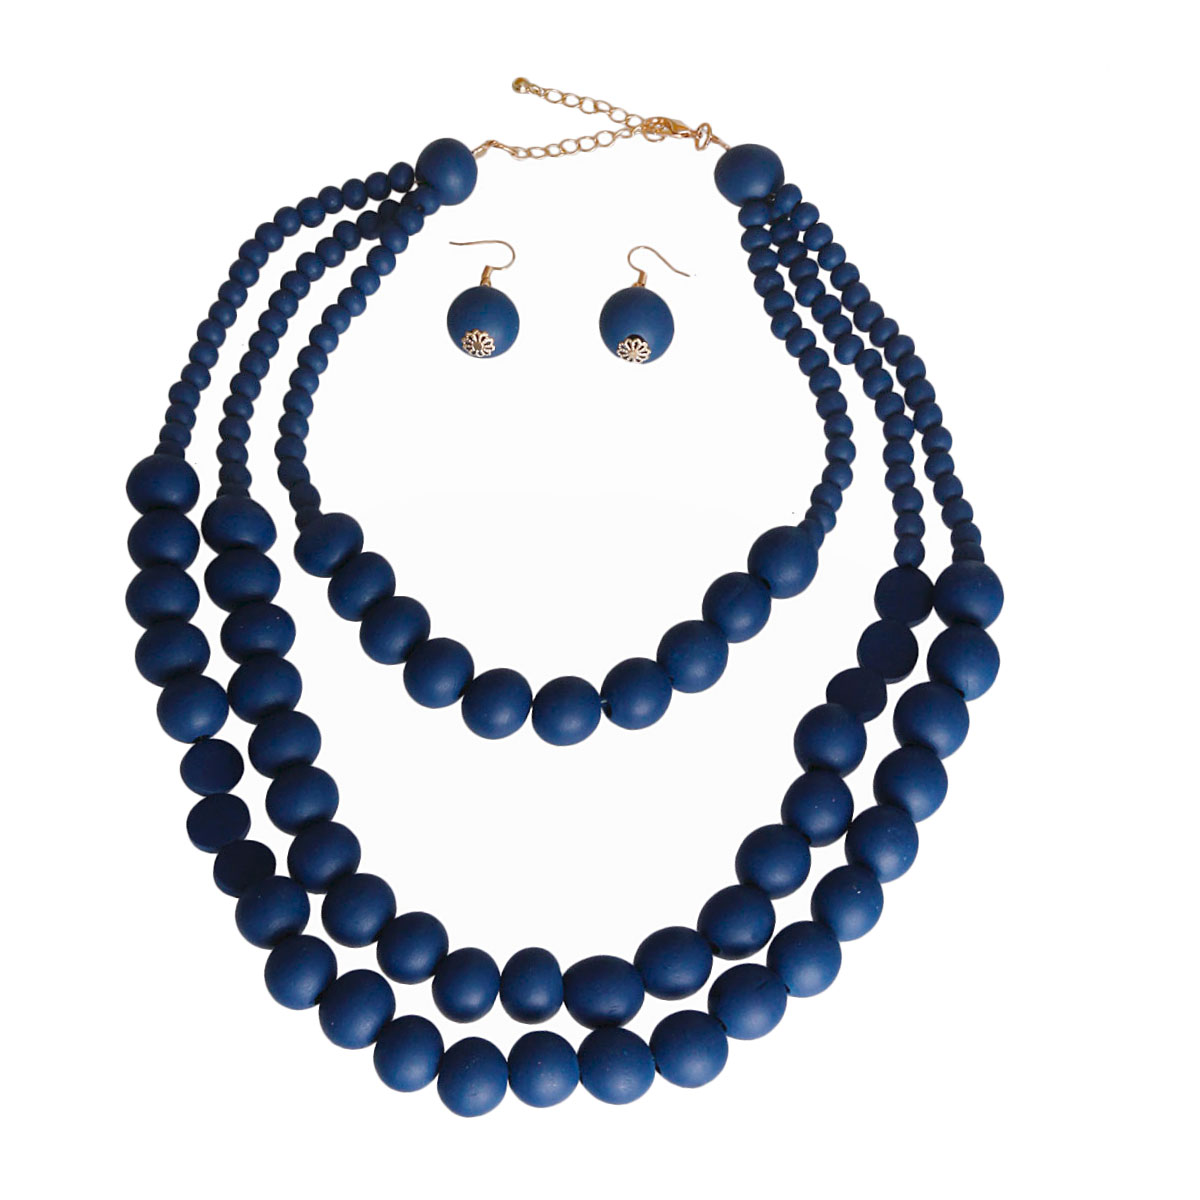 Blue Round Wood Bead 3 Strand Necklace